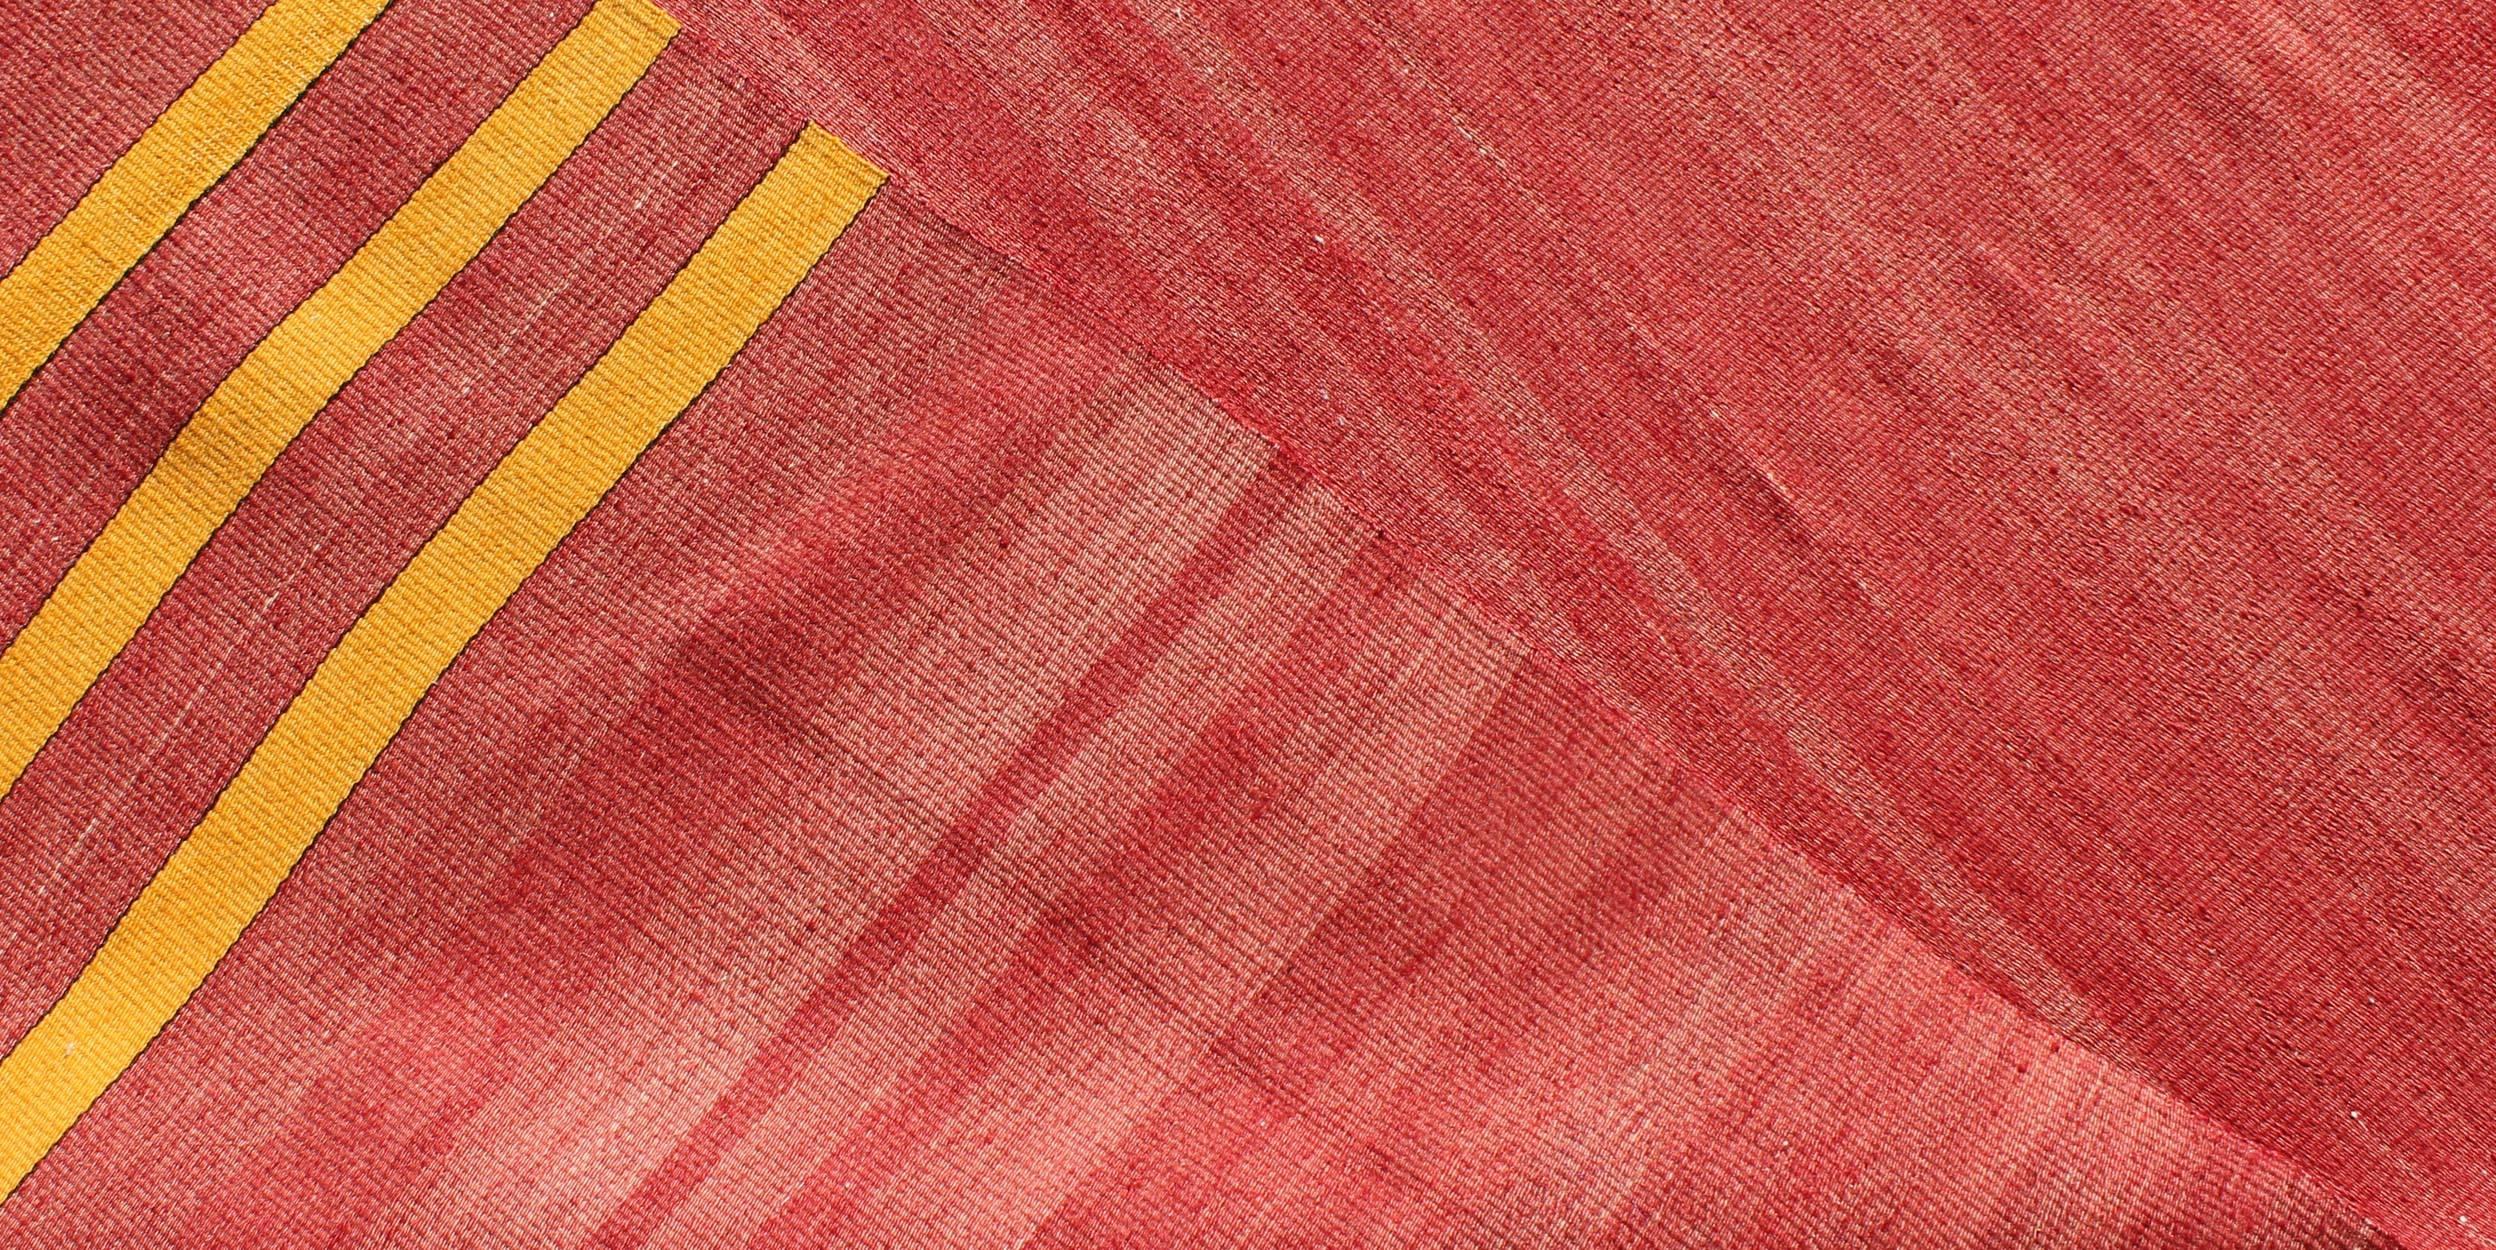 Wool Red, Yellow, and Salmon Pink Striped Midcentury Vintage Turkish Kilim Rug For Sale